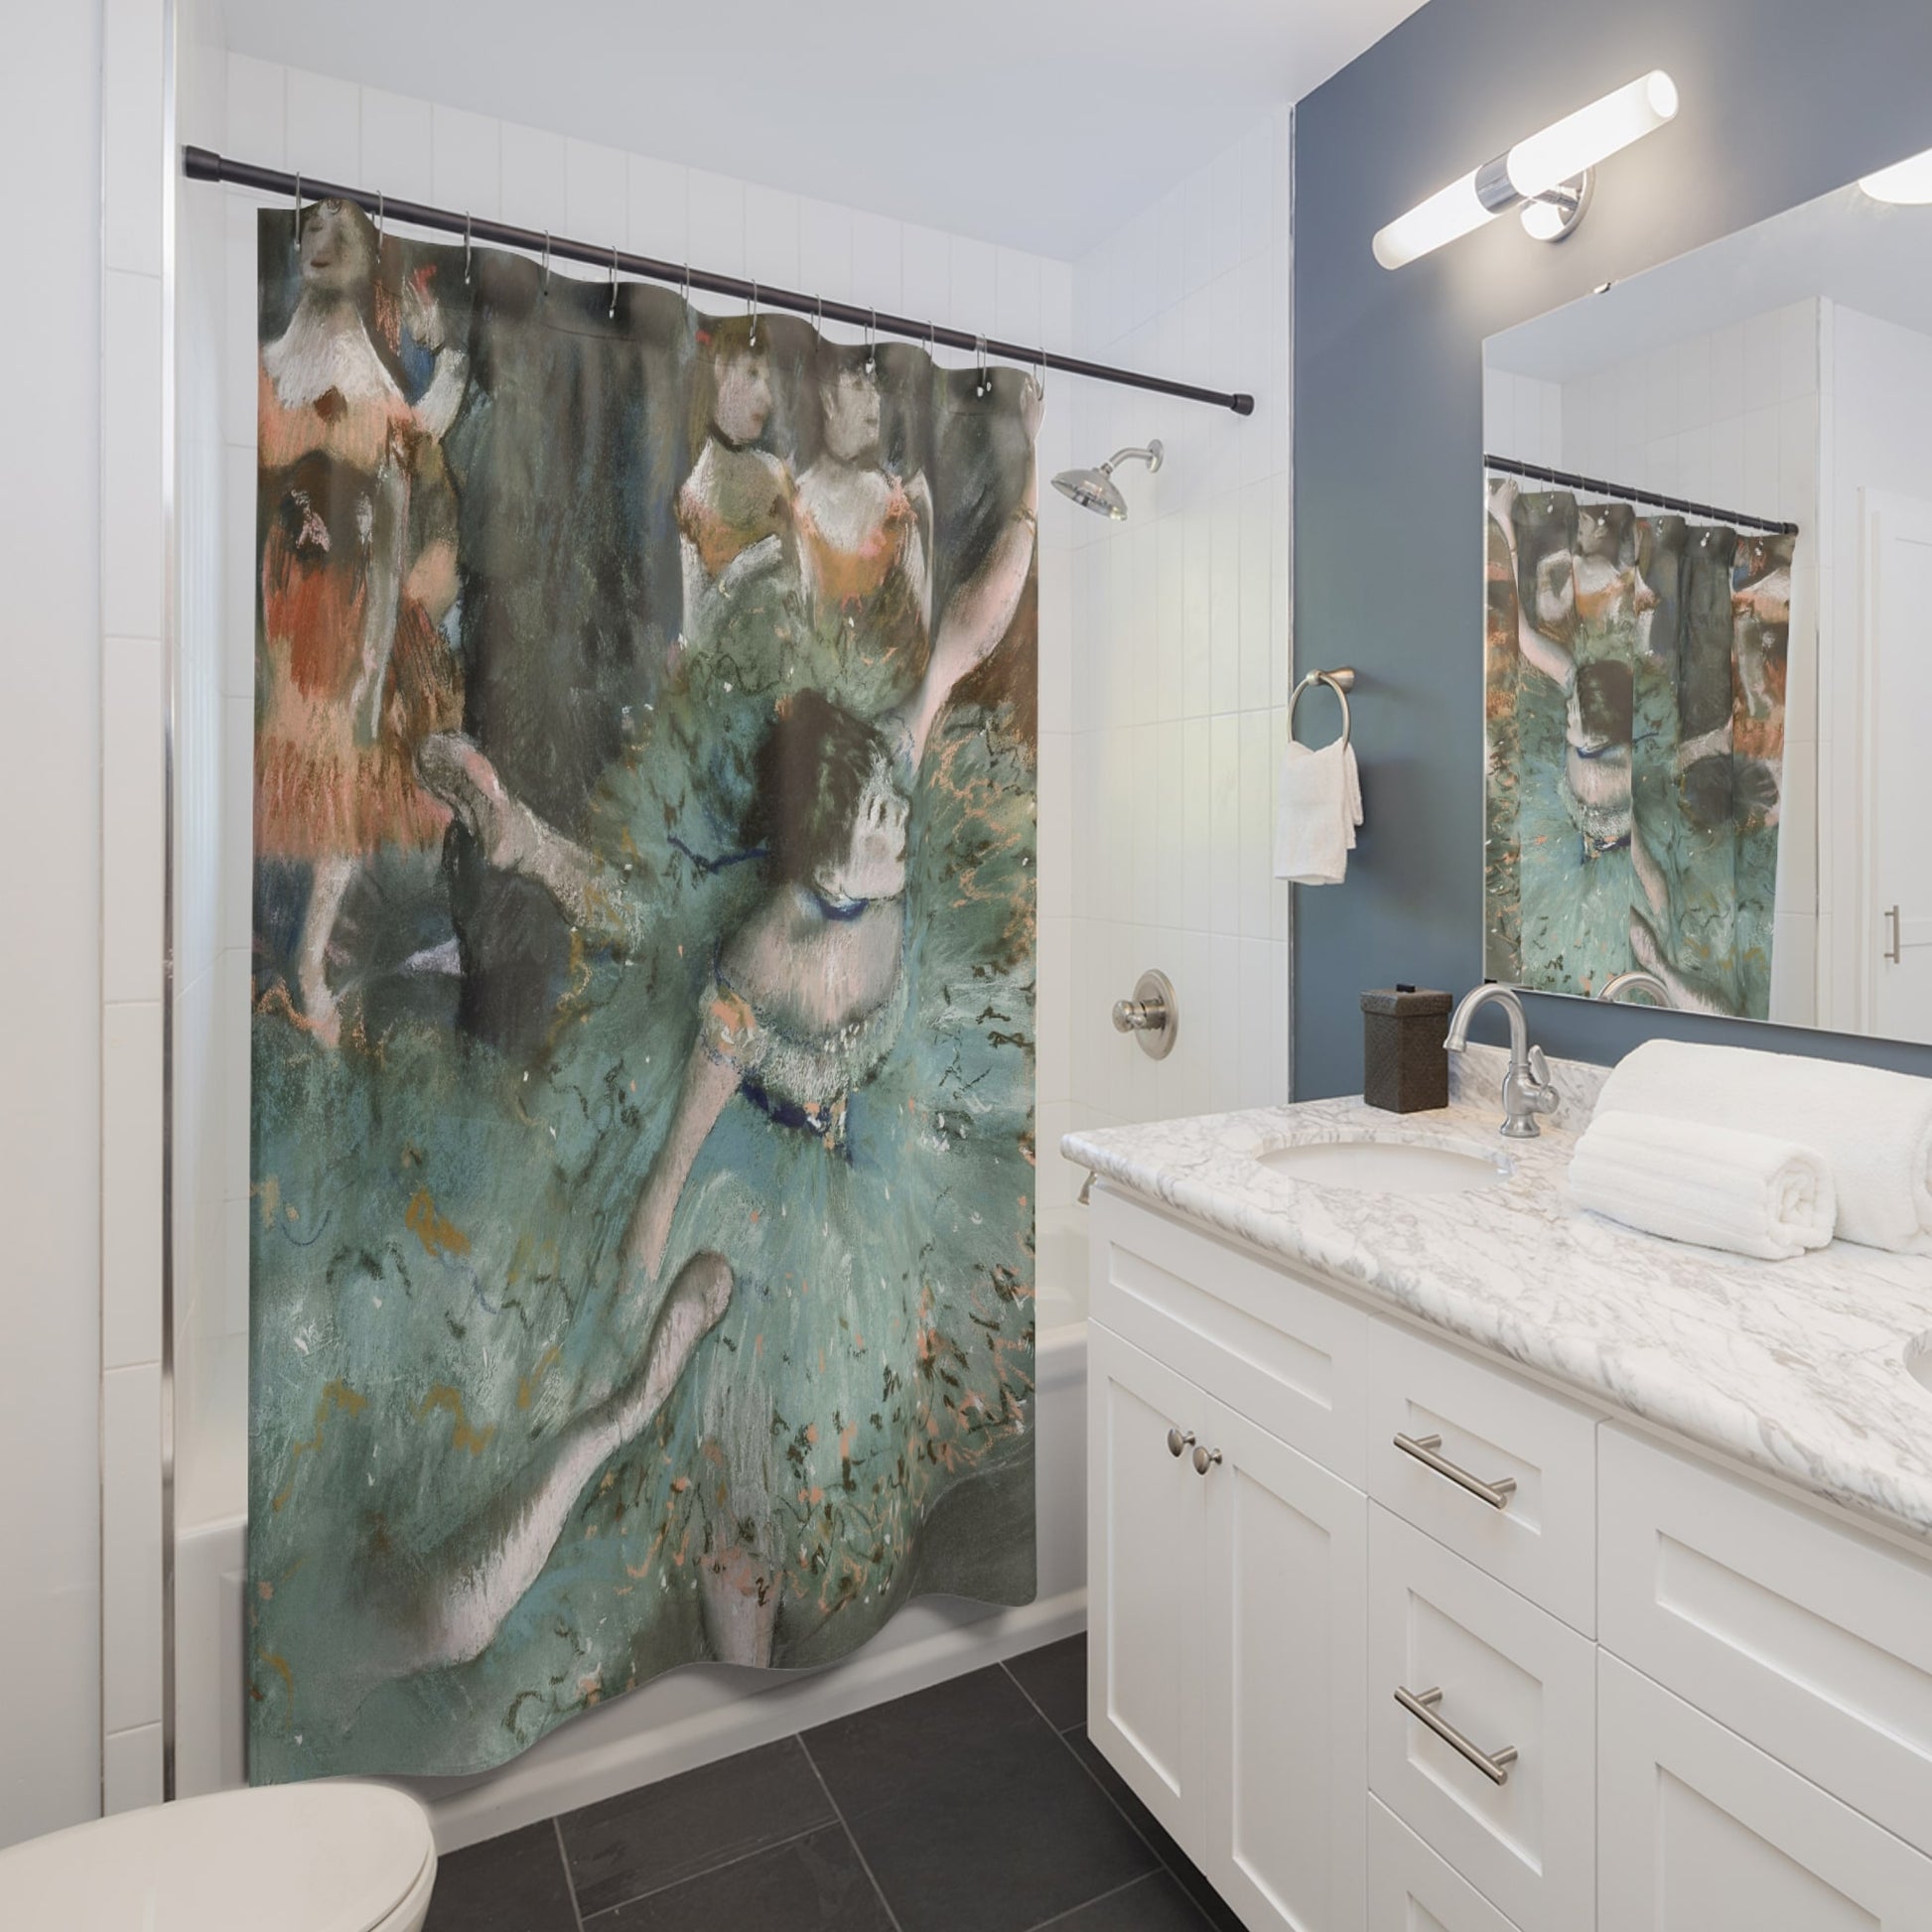 Ballet Painting Shower Curtain Best Bathroom Decorating Ideas for Victorian Decor